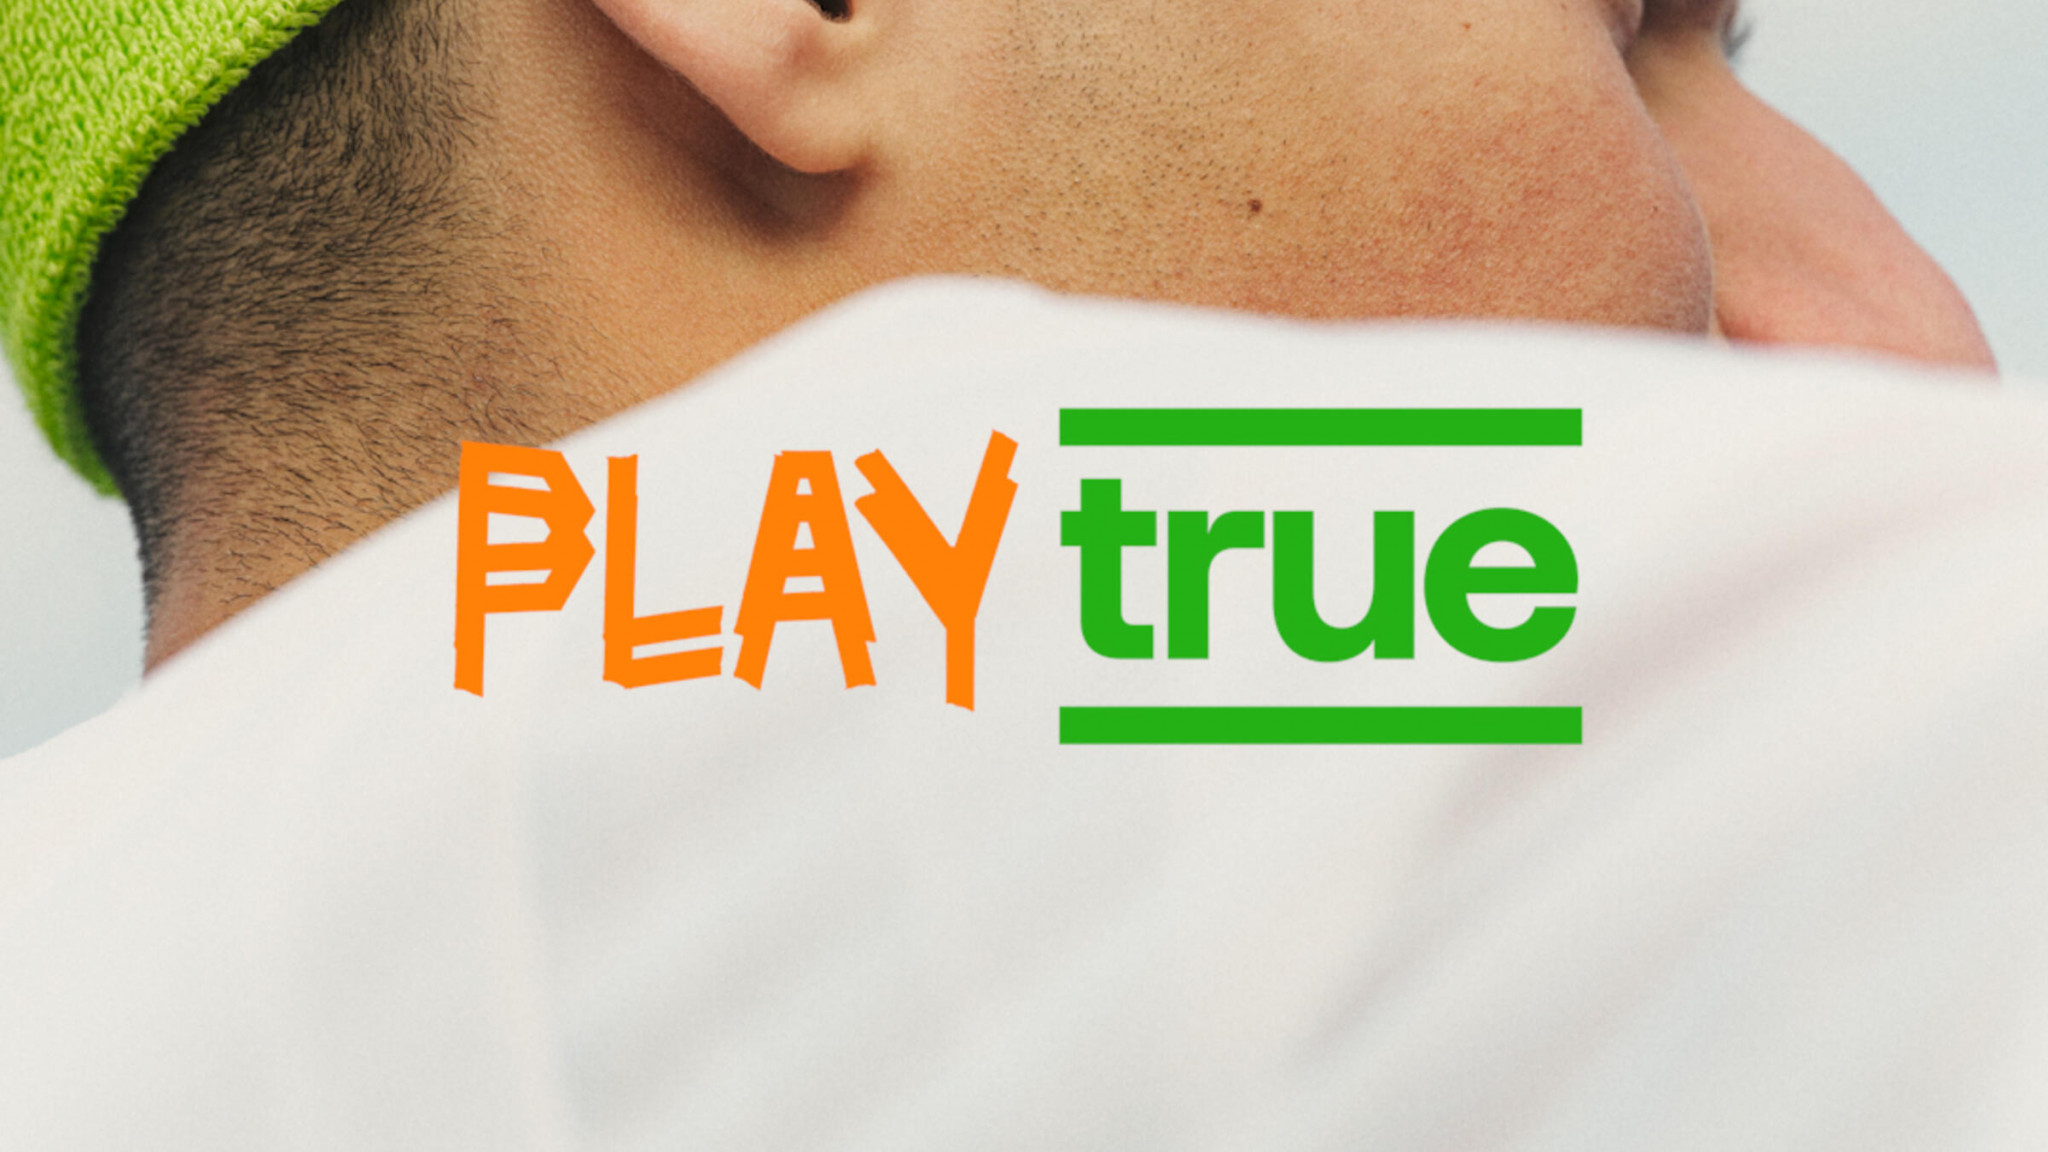 WADA's 2023 Play True Day campaign reaches more than 161 million worldwide